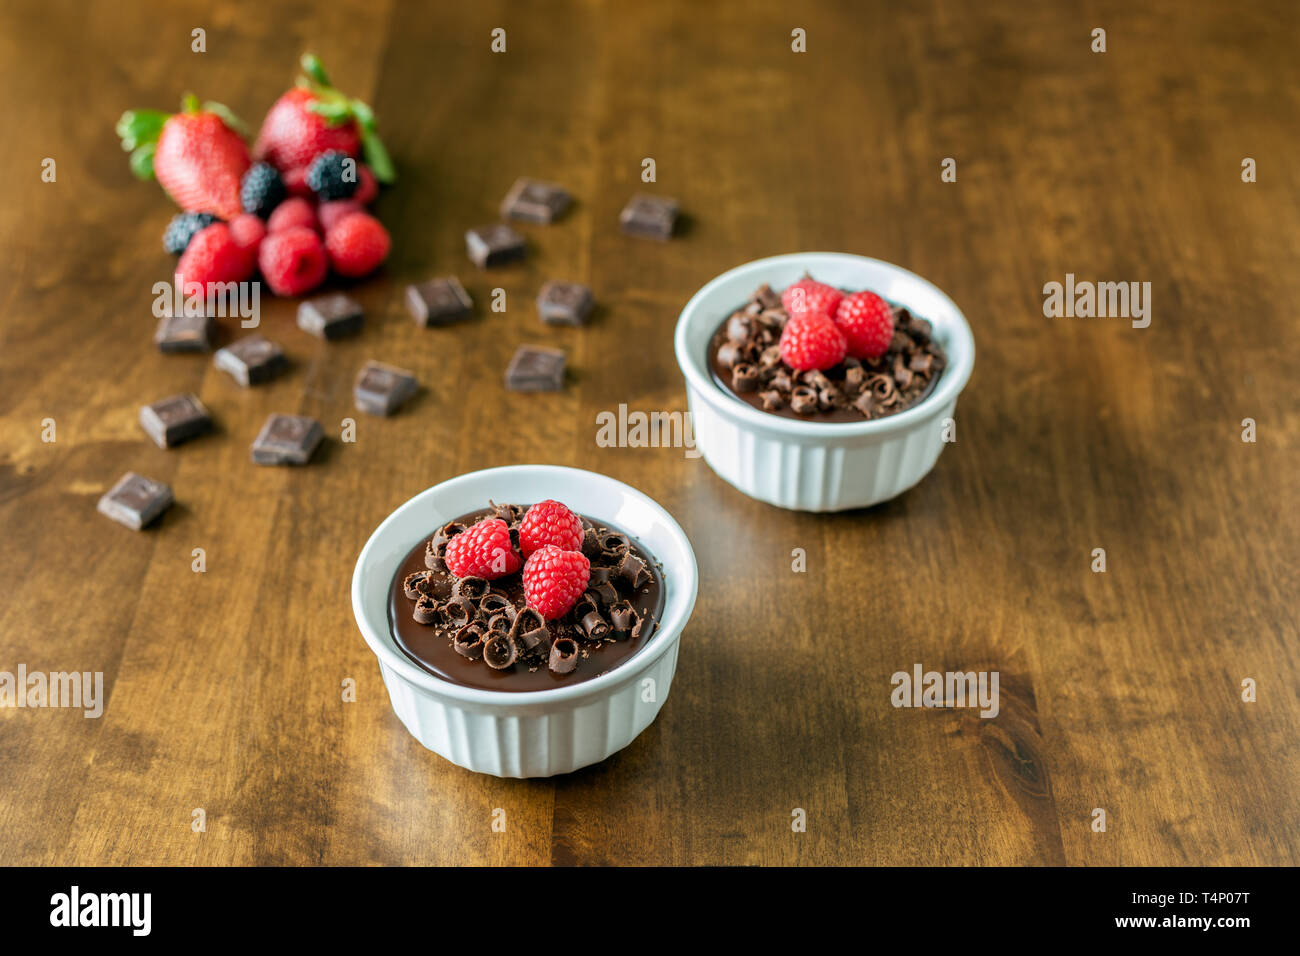 A decadent Chocolate Mousse Cake with chocolate ganache and topped with Raspberries, Blackberries and chocolate curls on a wood table in a ramekin dis Stock Photo